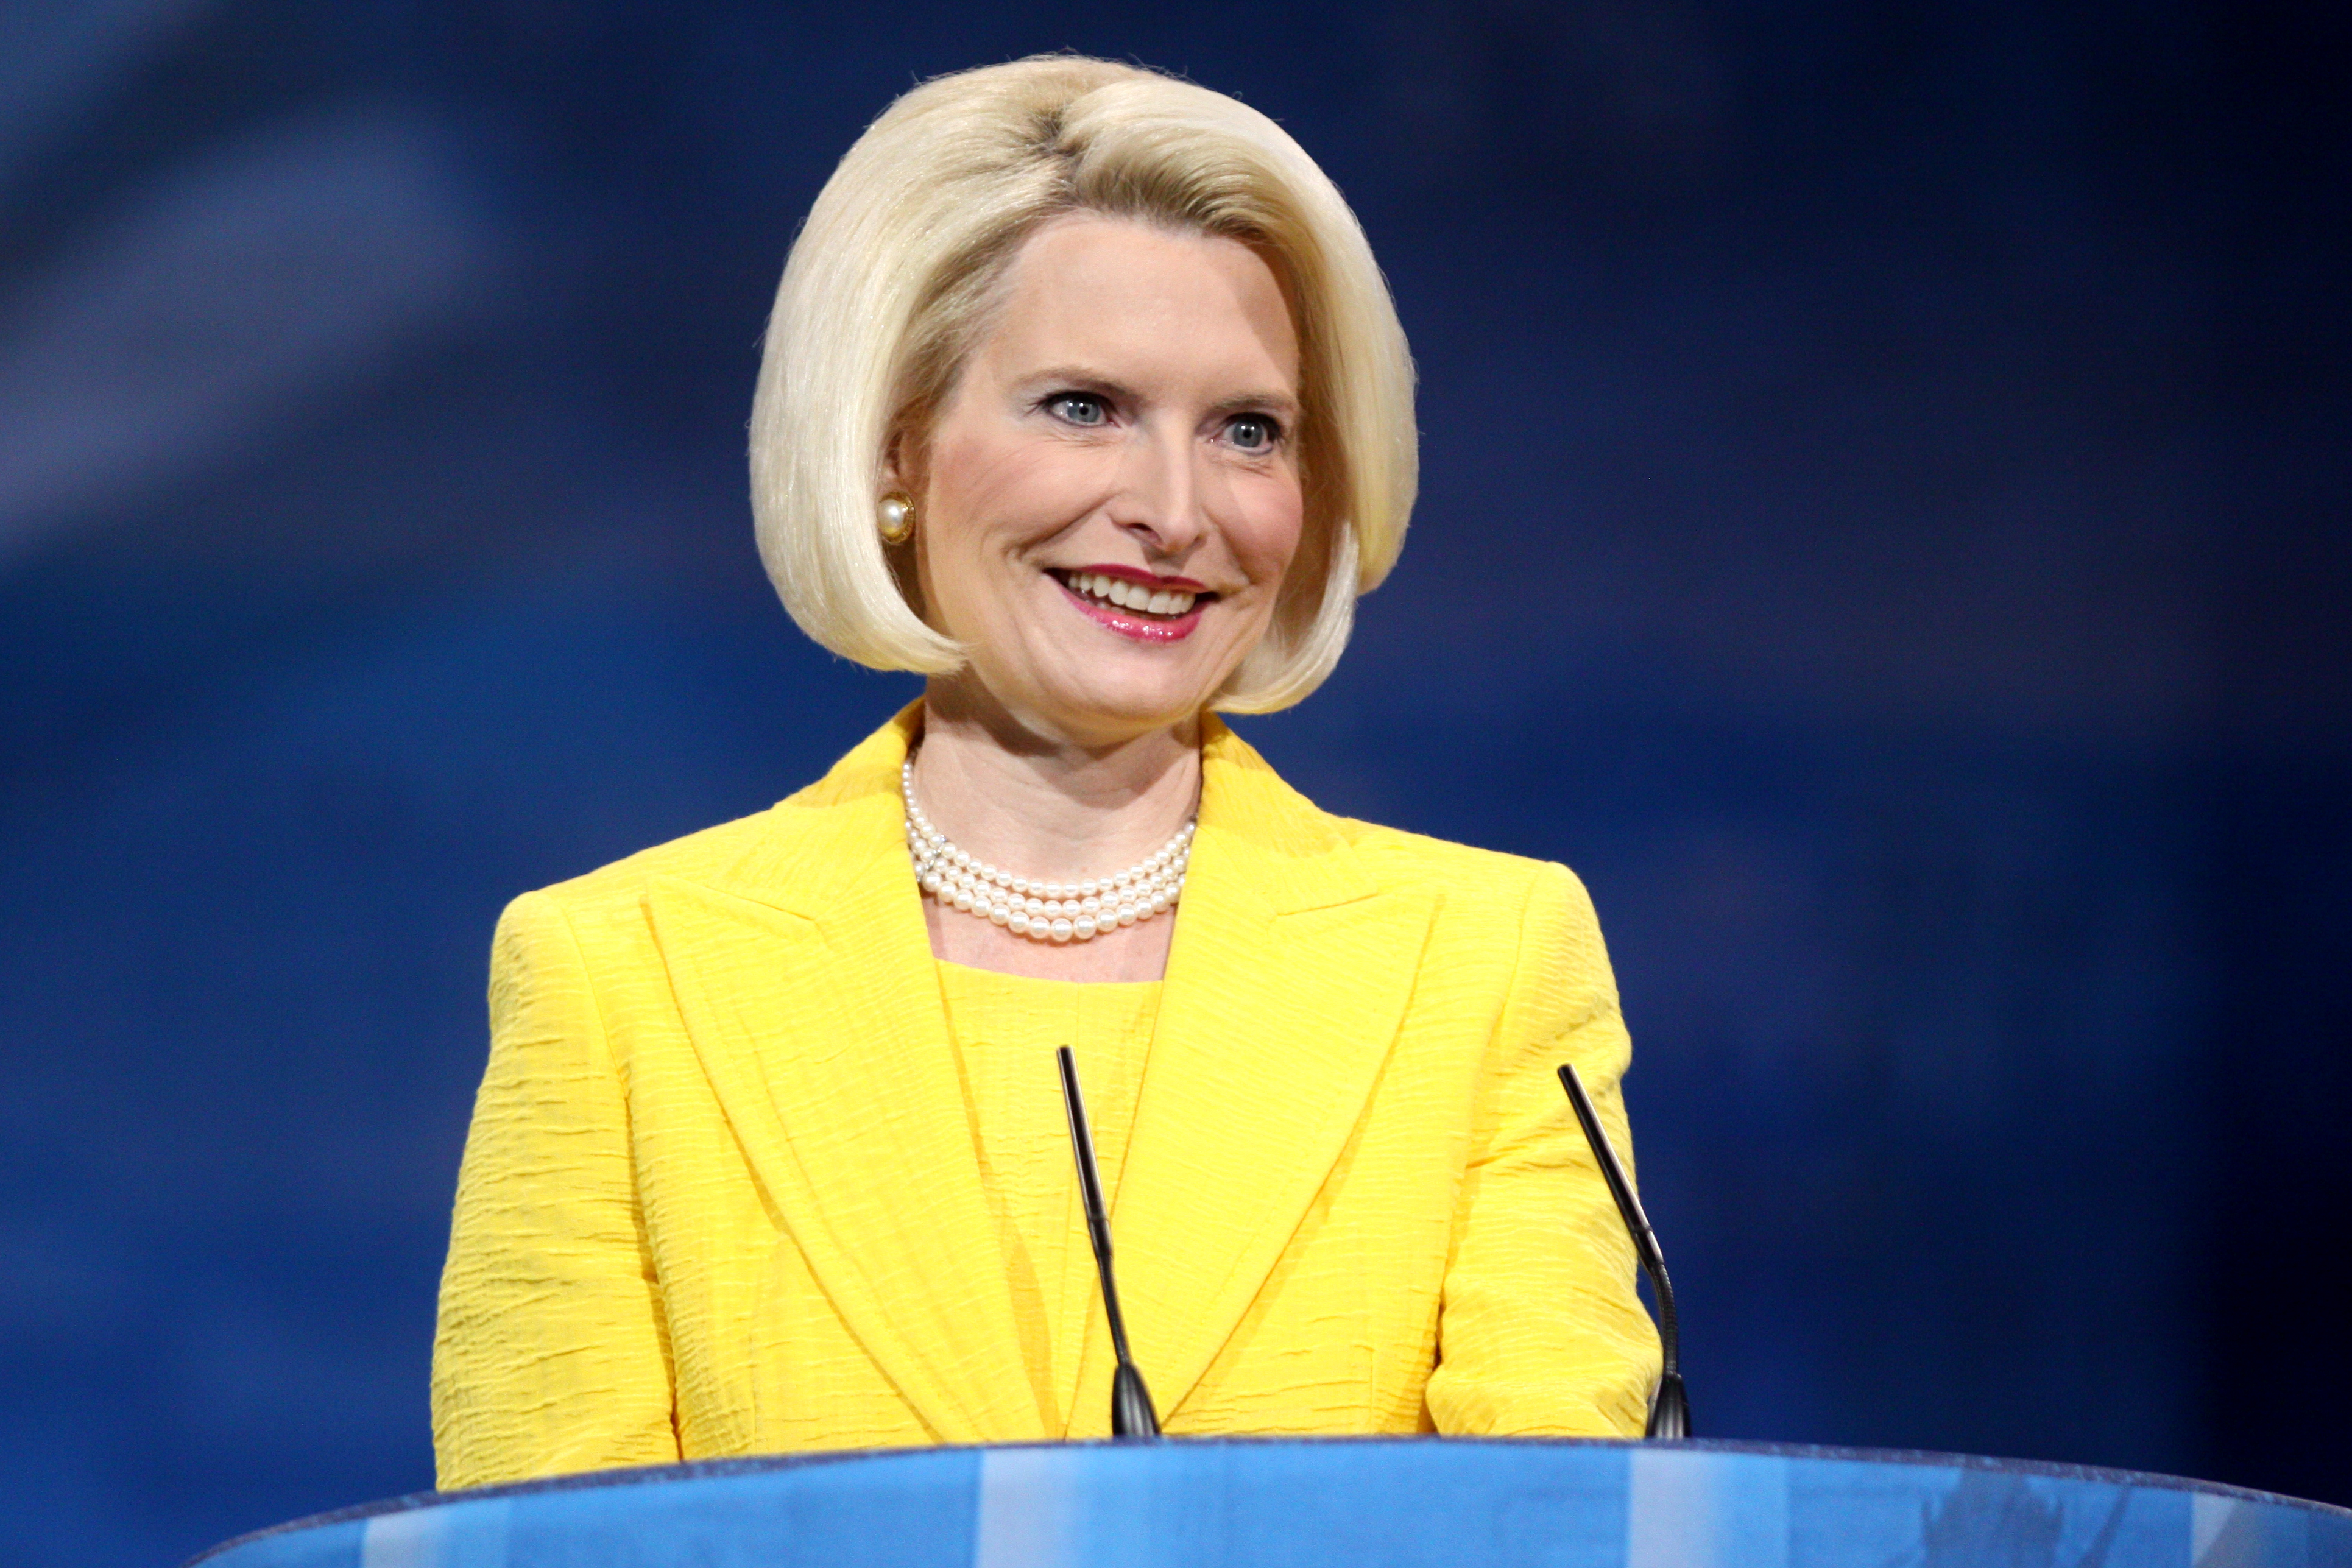 Callista_Gingrich_by_Gage_Skidmore Wikimedia Commons